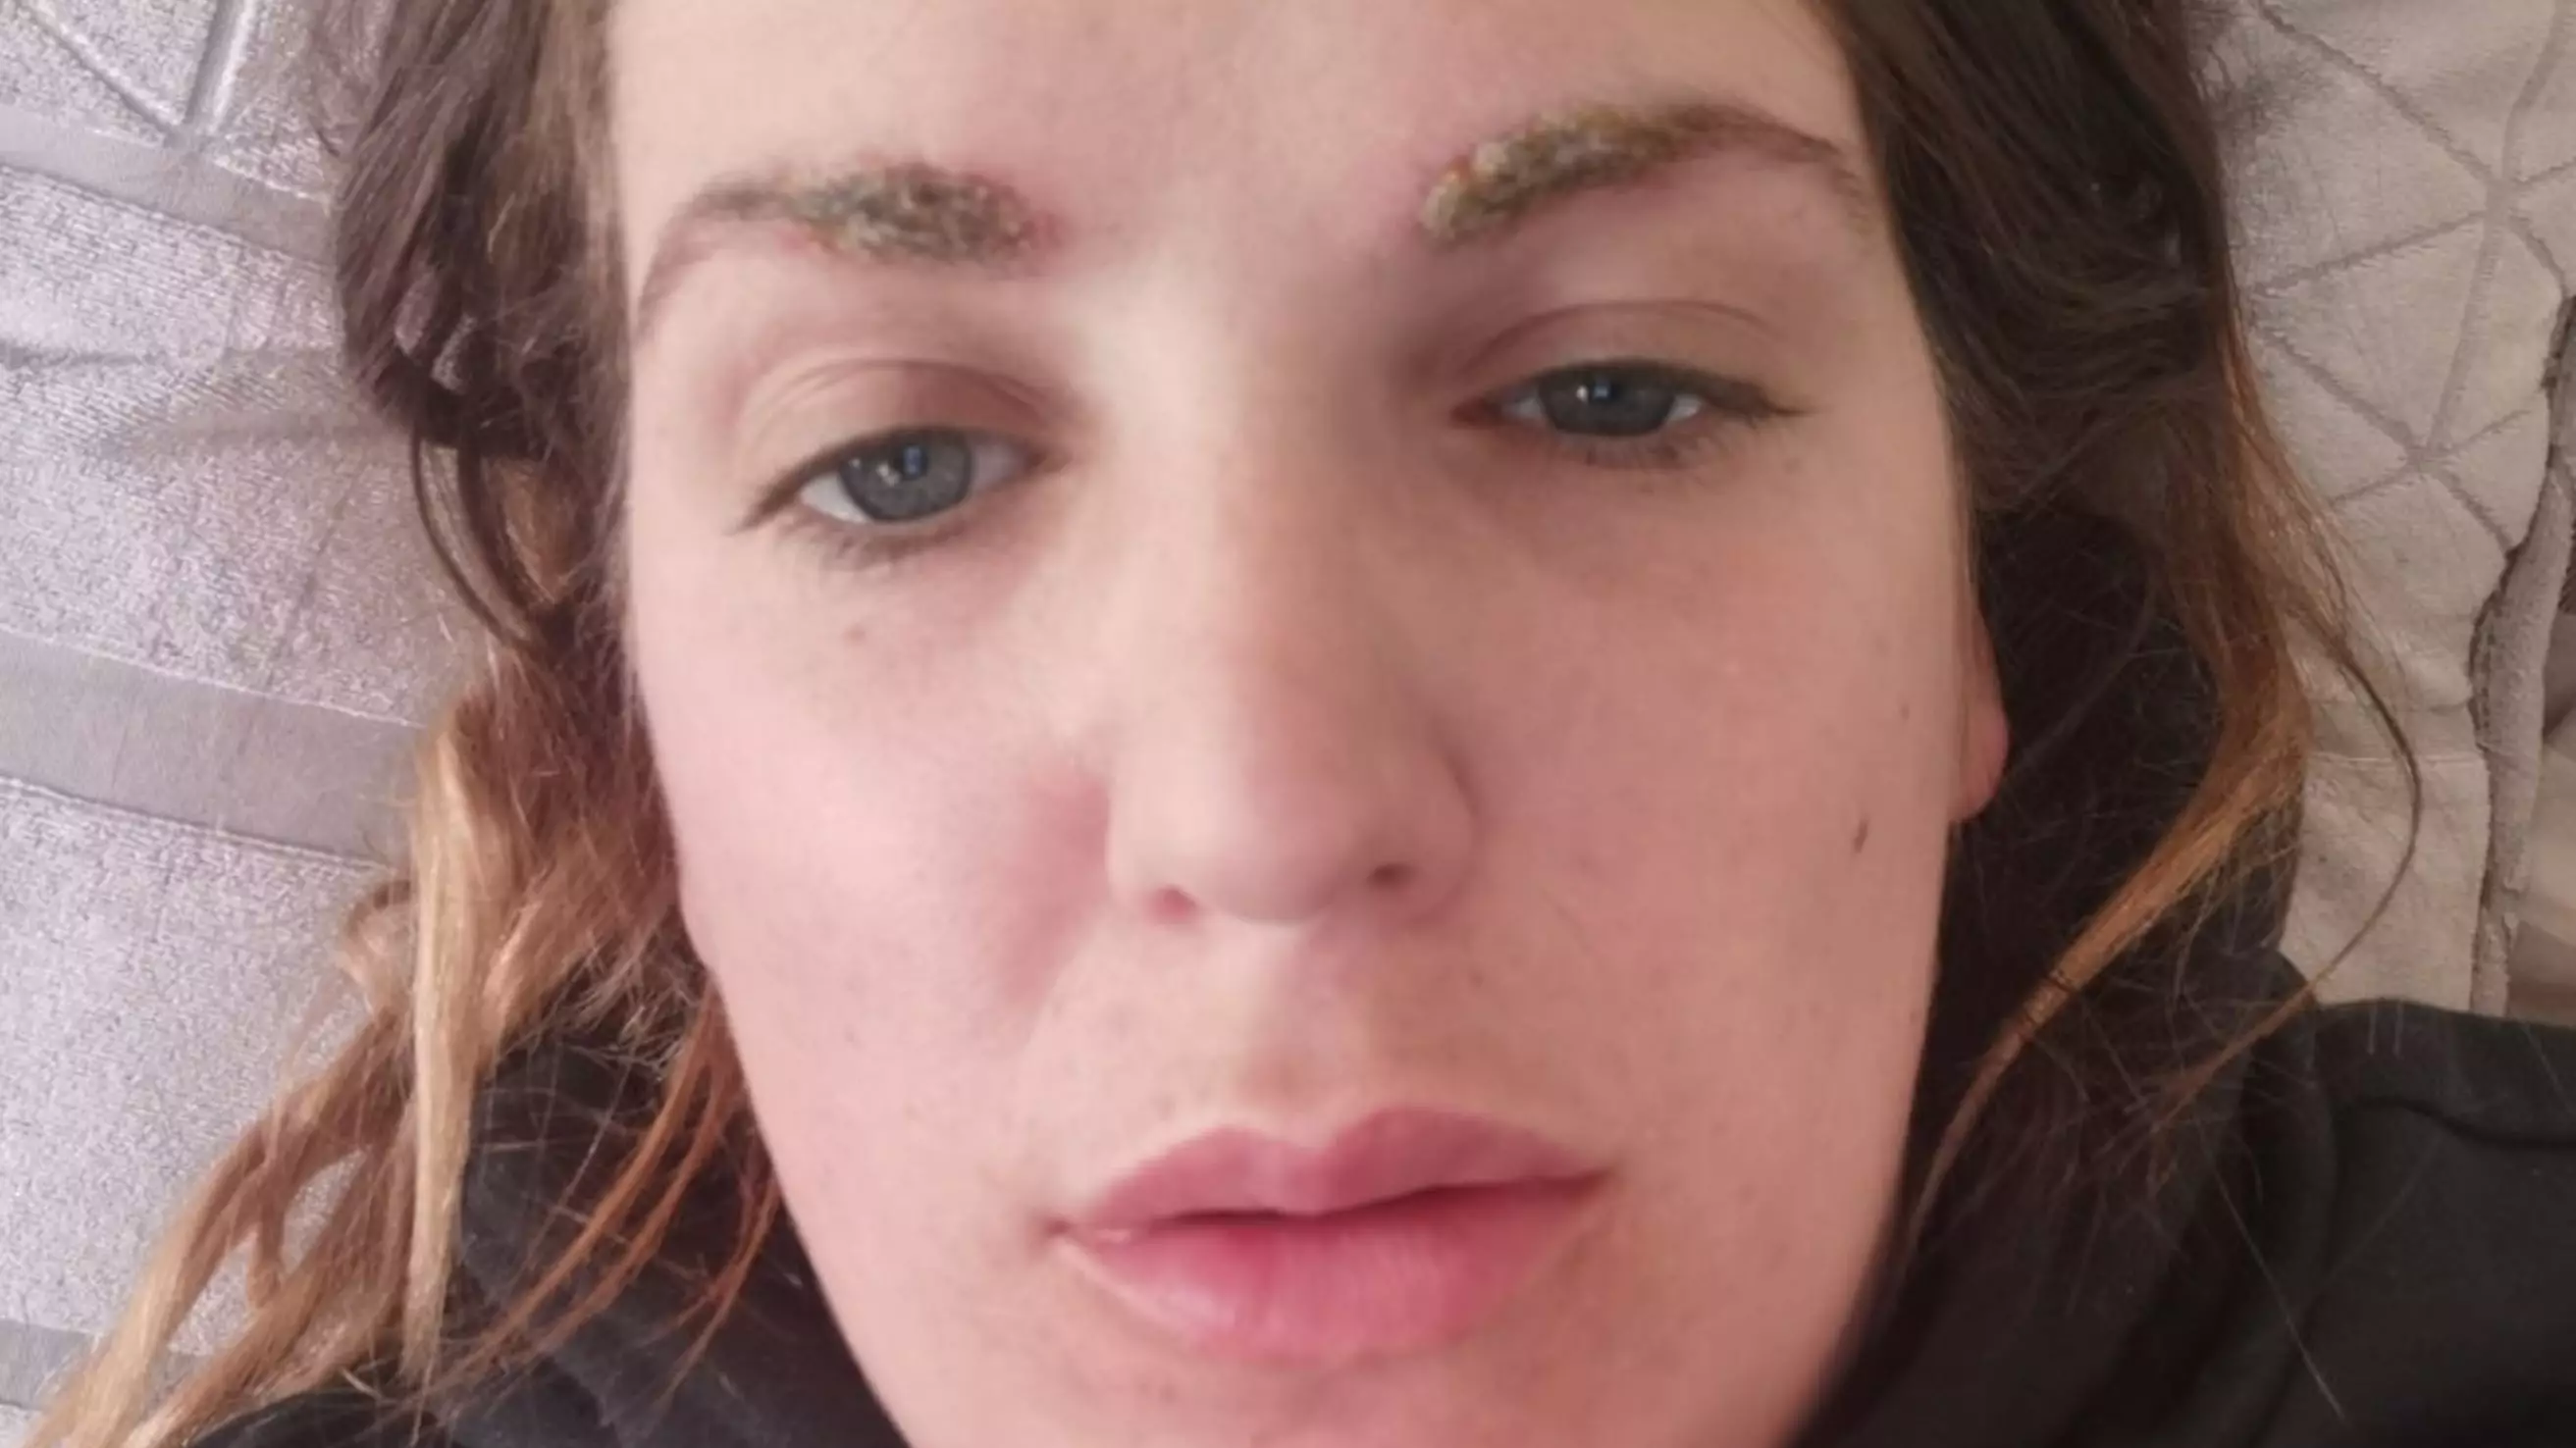 Salon Owner Who Forgot To Patch Test Left With 'Crusty Caterpillar' Brows Following Allergic Reaction